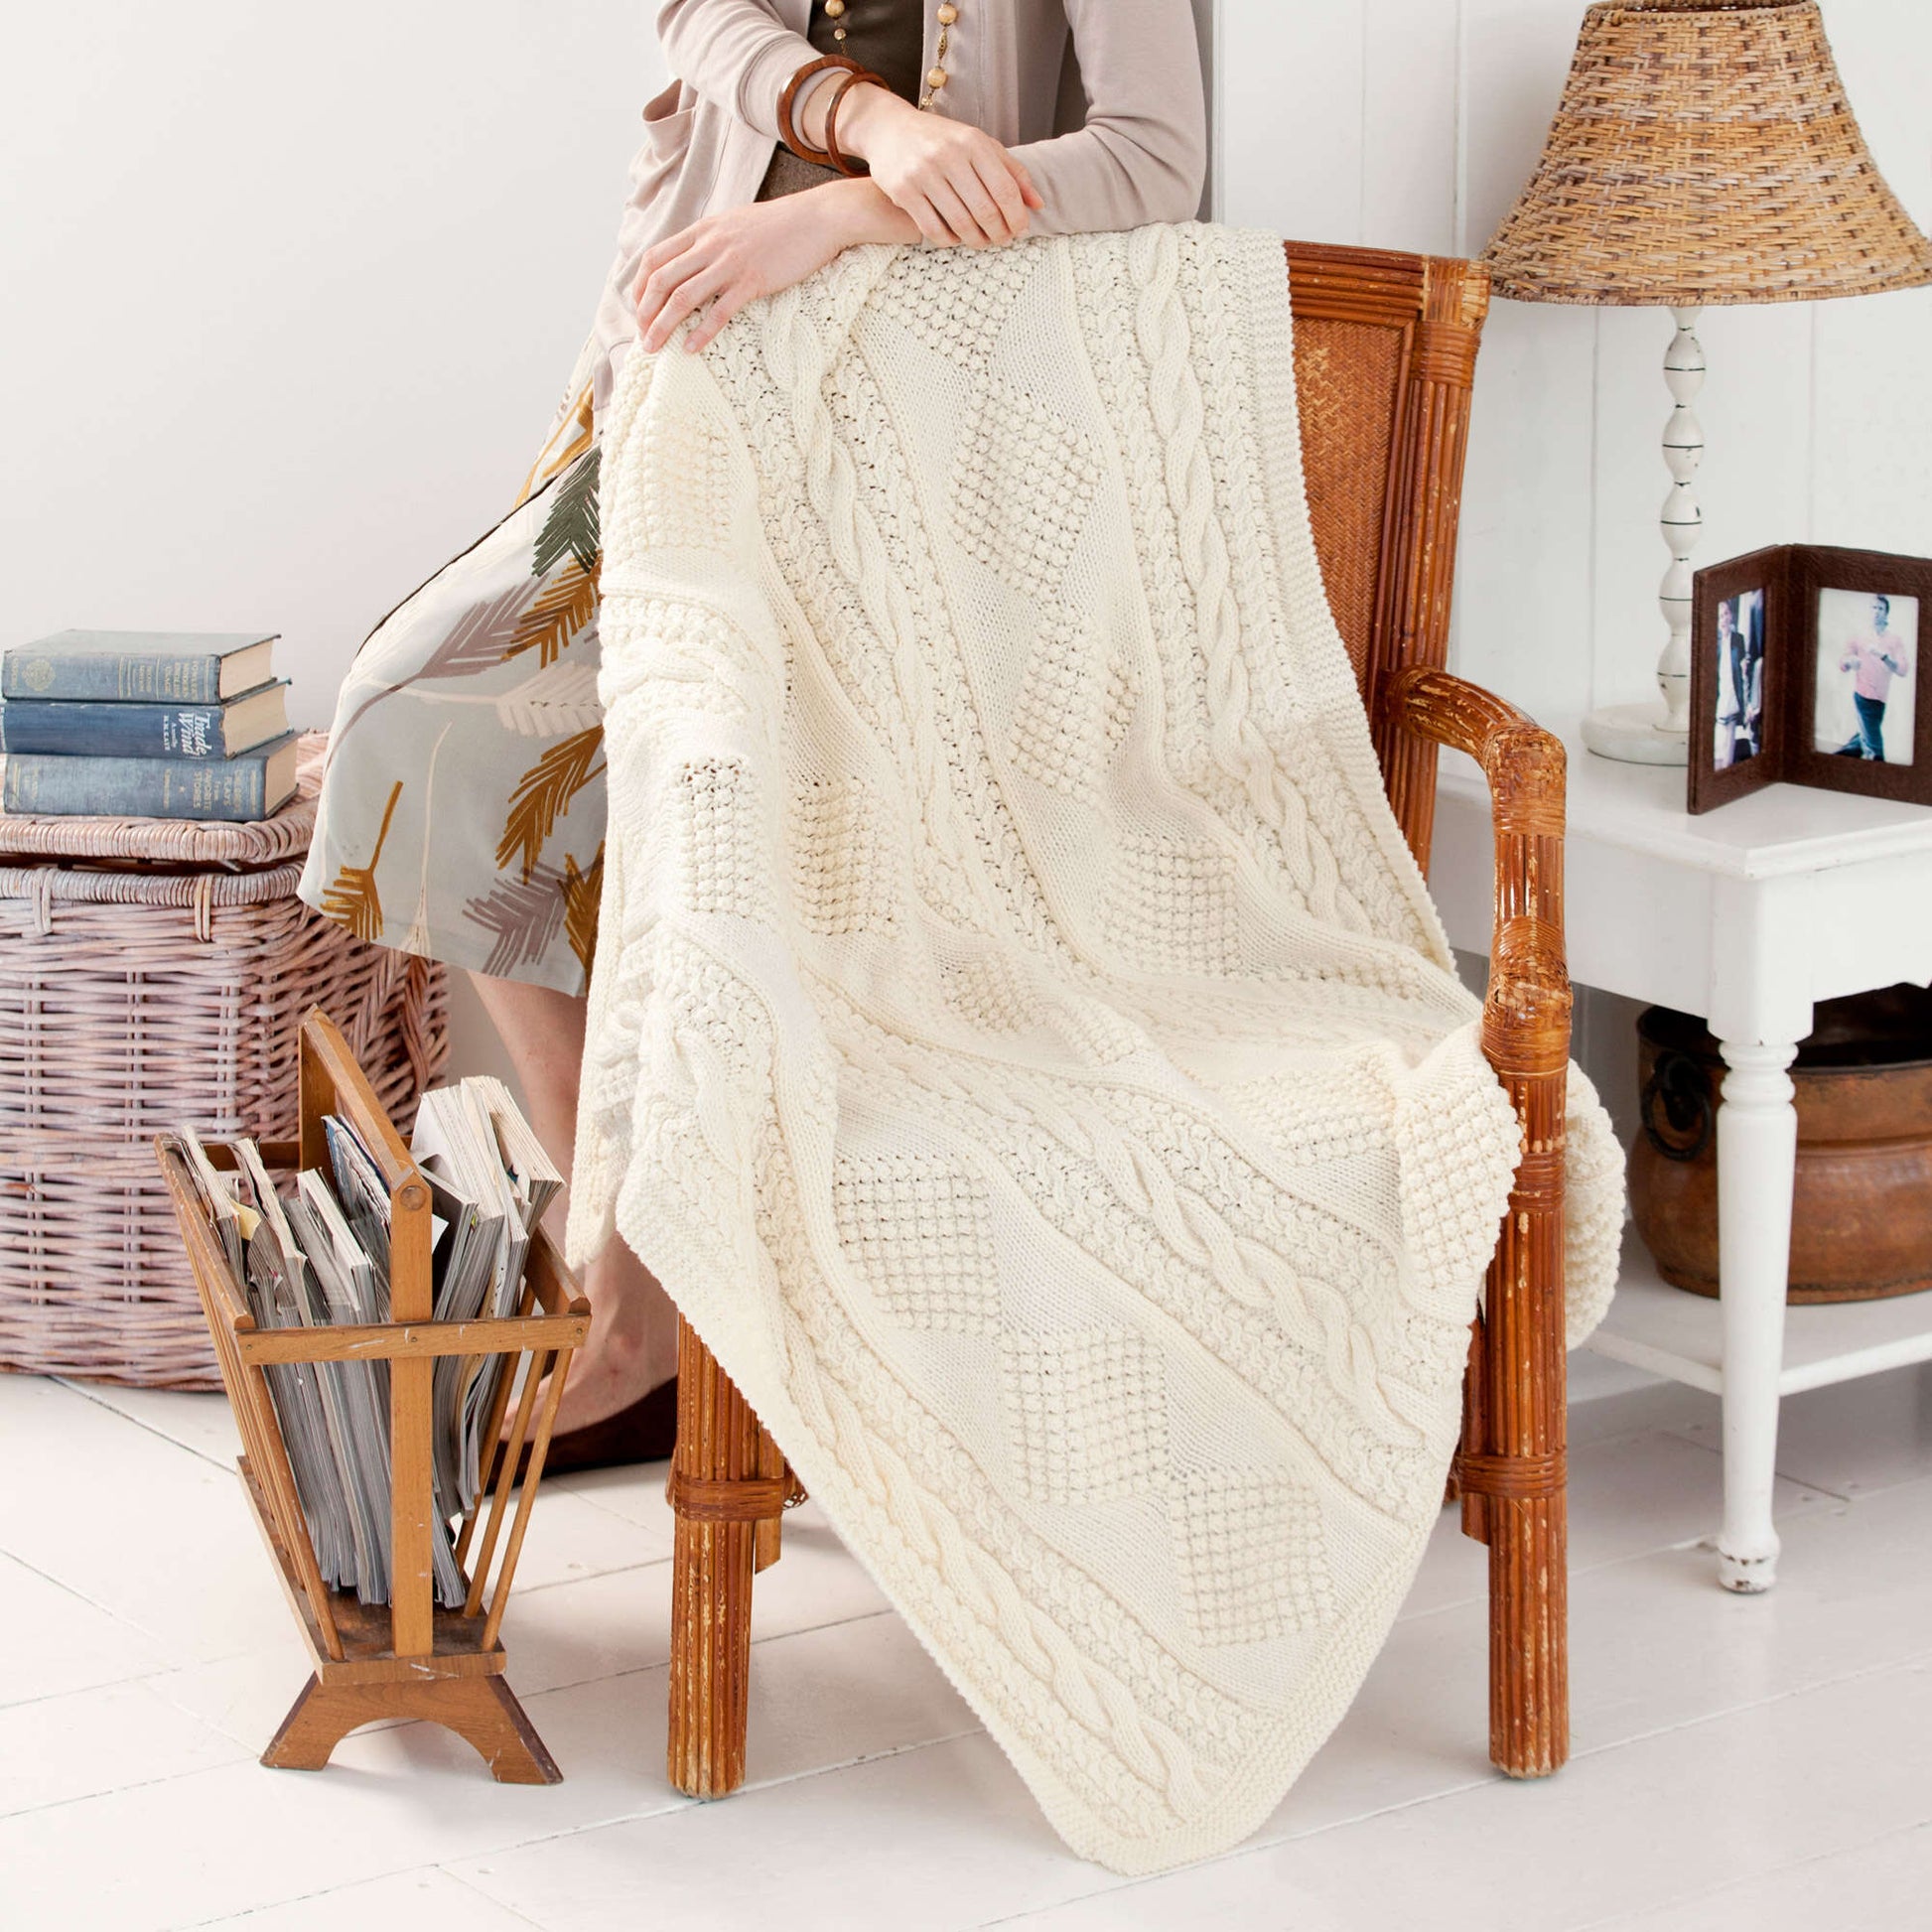 Free Red Heart Treasure Chest Throw Knit Pattern